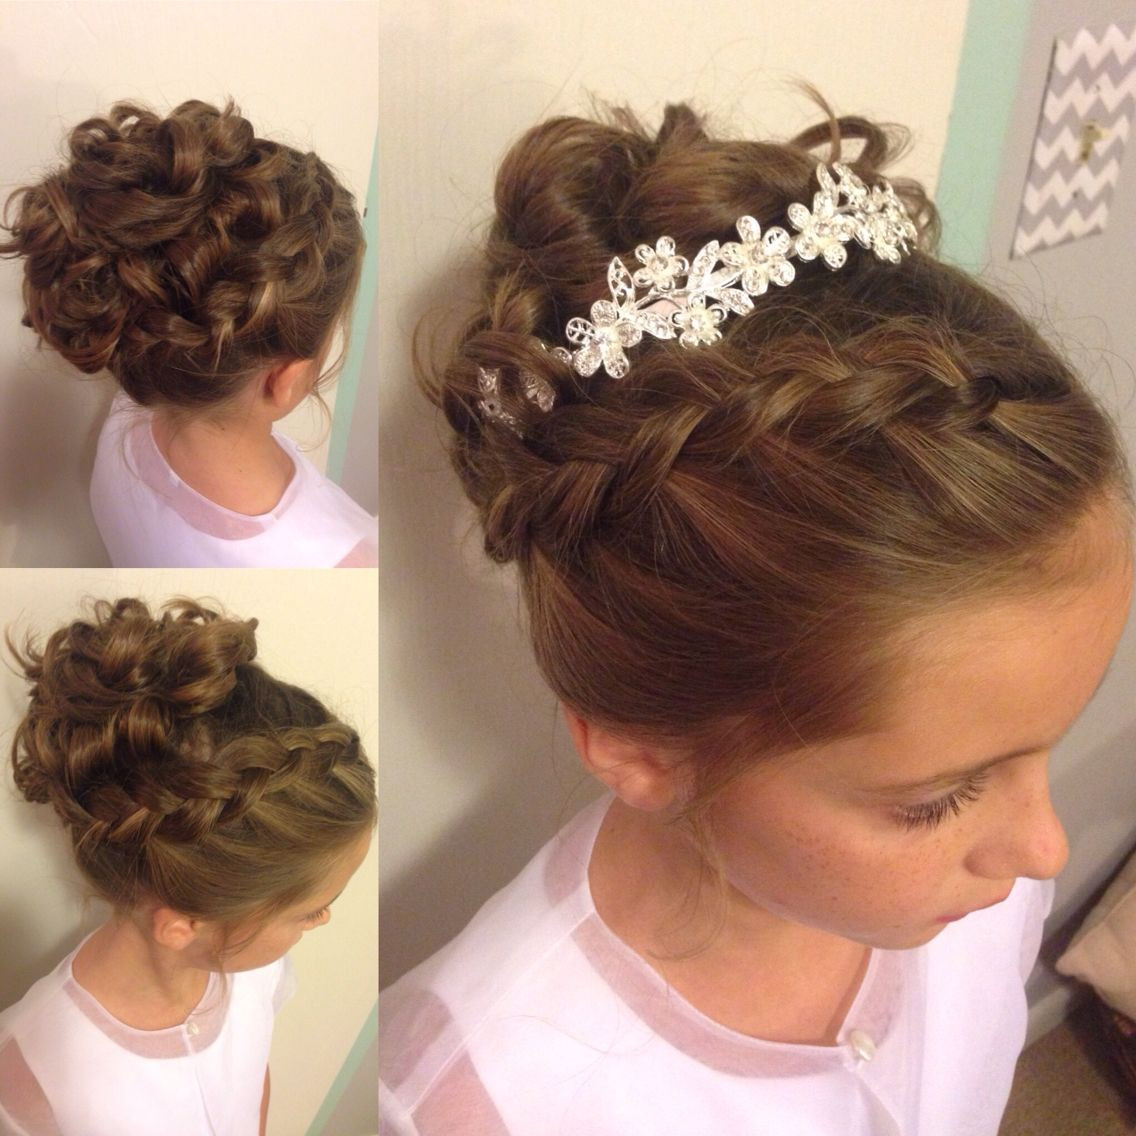 Updo Hairstyle For Little Girls
 Little girl updo Wedding hairstyle Instagram